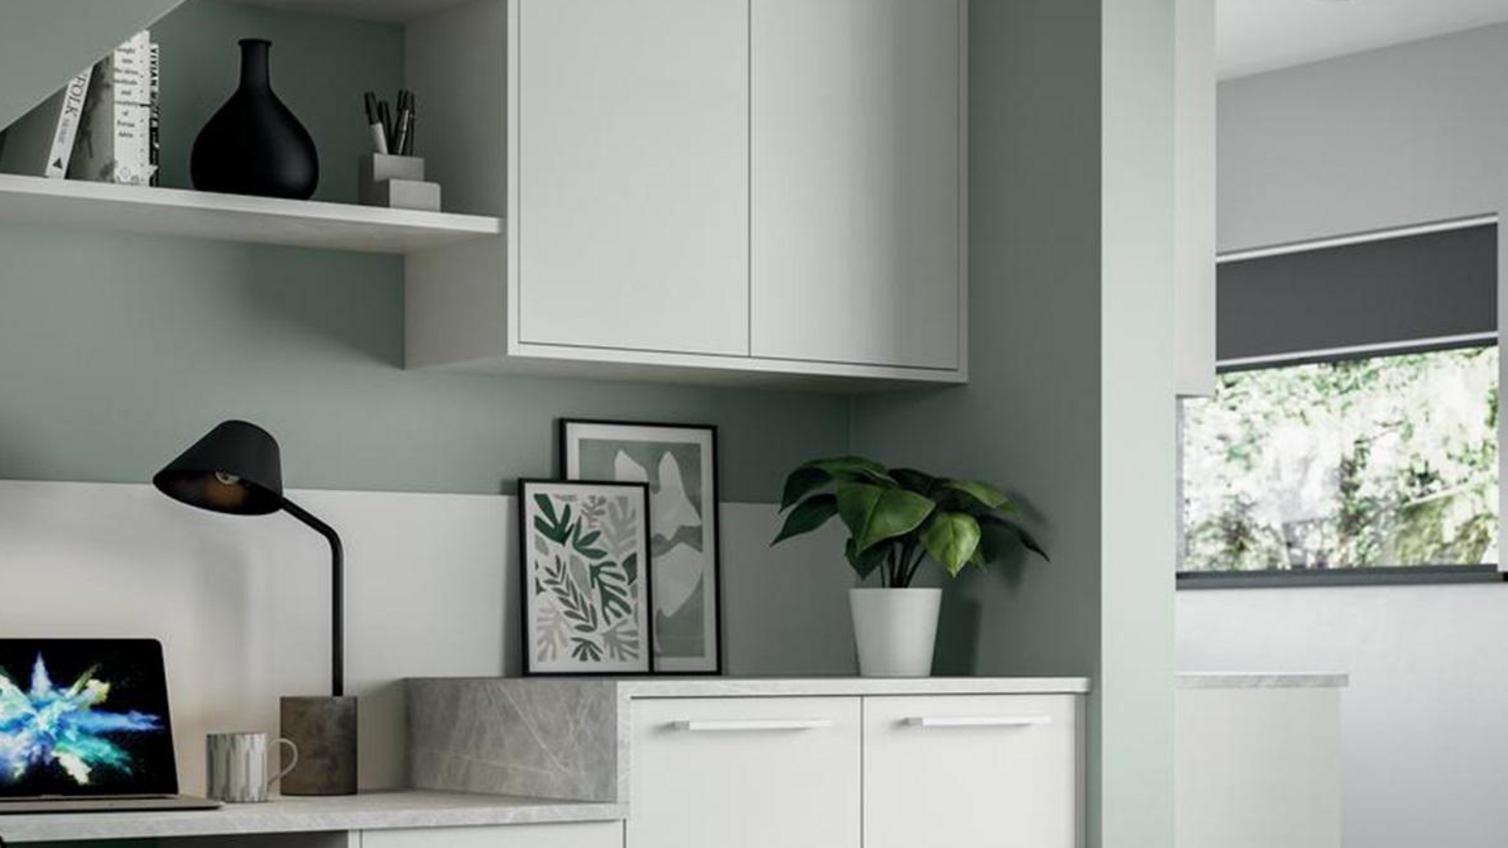 Home office storage idea in a Greenwich Gloss White kitchen, using wall, base, and drawer cabinetry for storage.